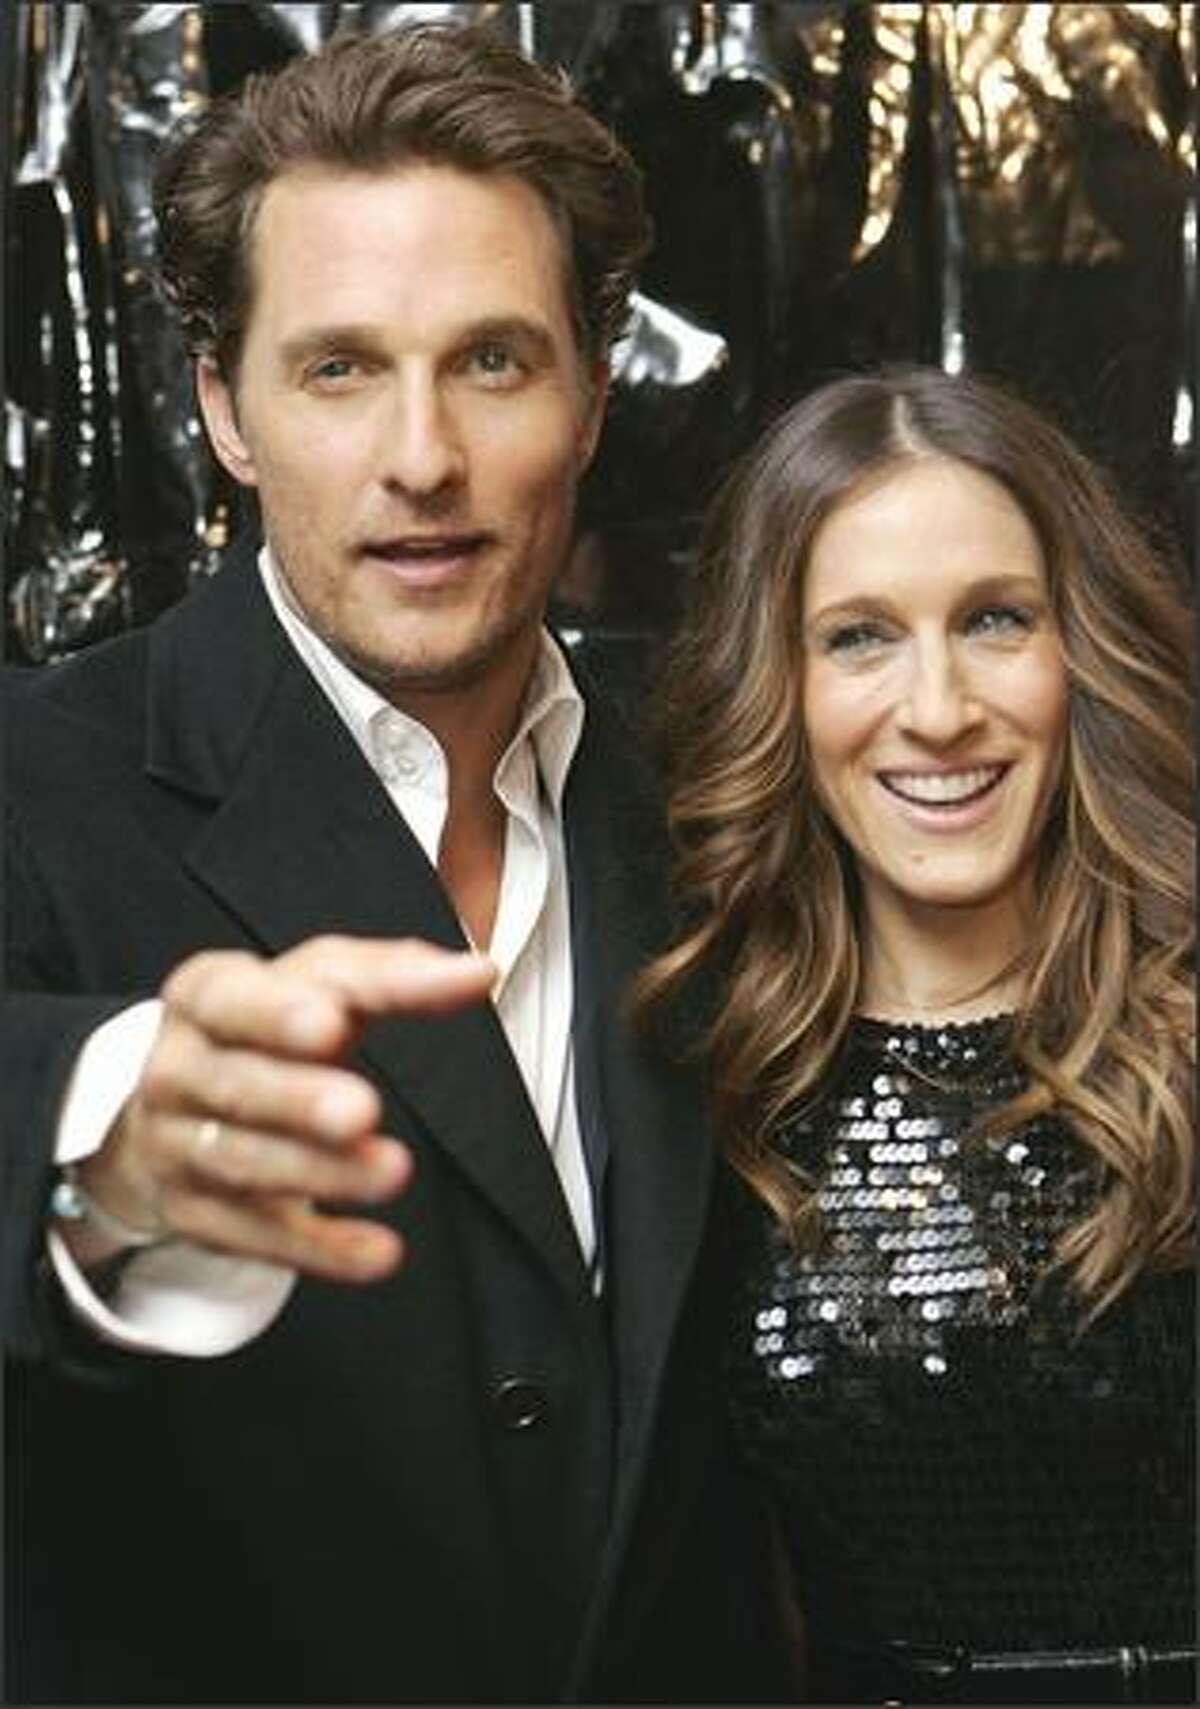 Matthew McConnaughey and Sarah Jessica Parker mug for the cameras at the premiere of their movie, "Failure To Launch," in New York Wednesday. The film's director, Tom Dey, says McConnaughey and Parker are totally different people and it was fun to watch his laid-back style with her high-energy persona.